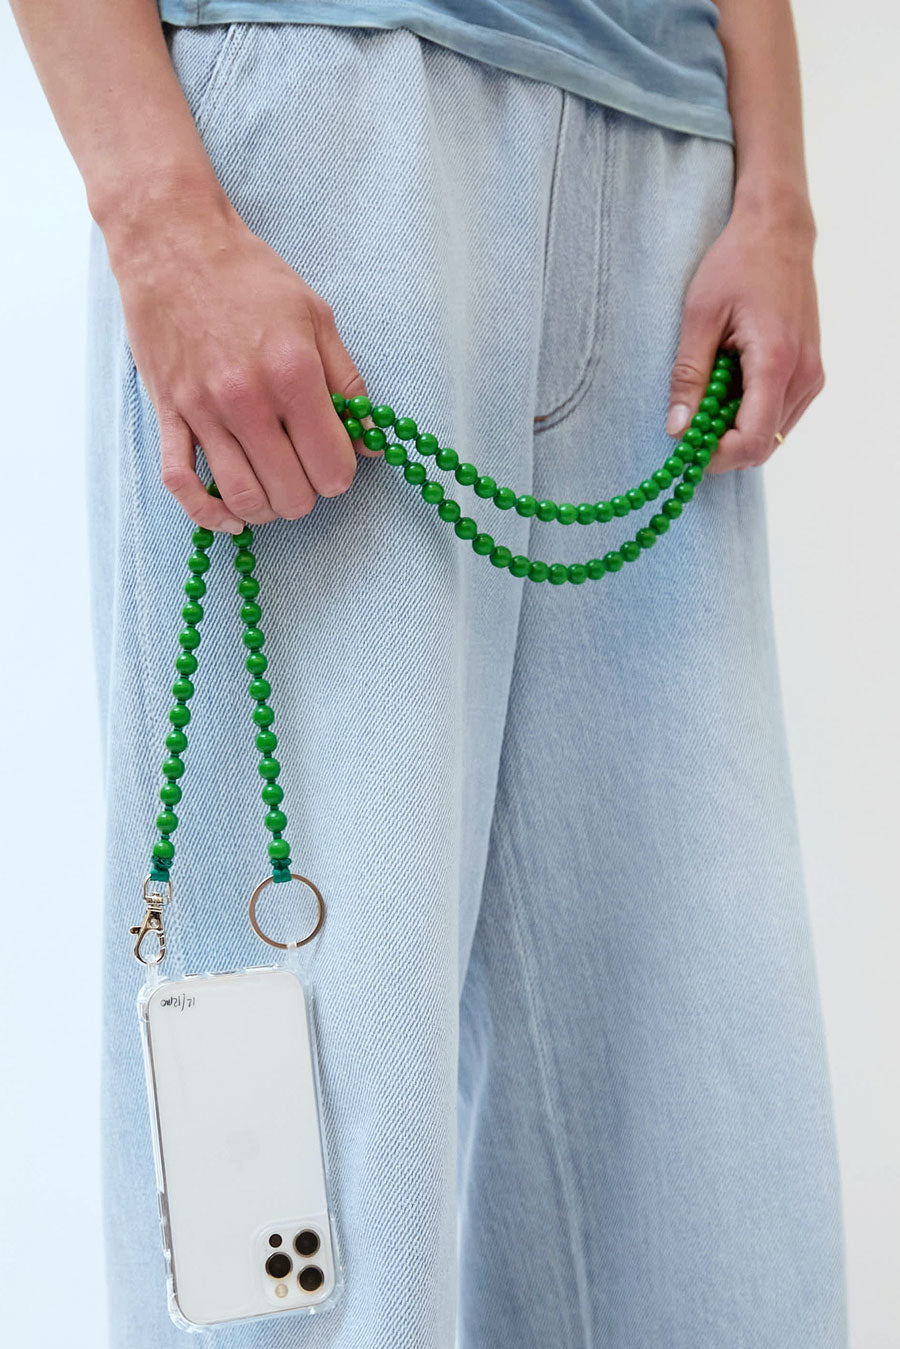 Ina Seifart Handykette Iphone Necklace in Green with Dark Green Thread